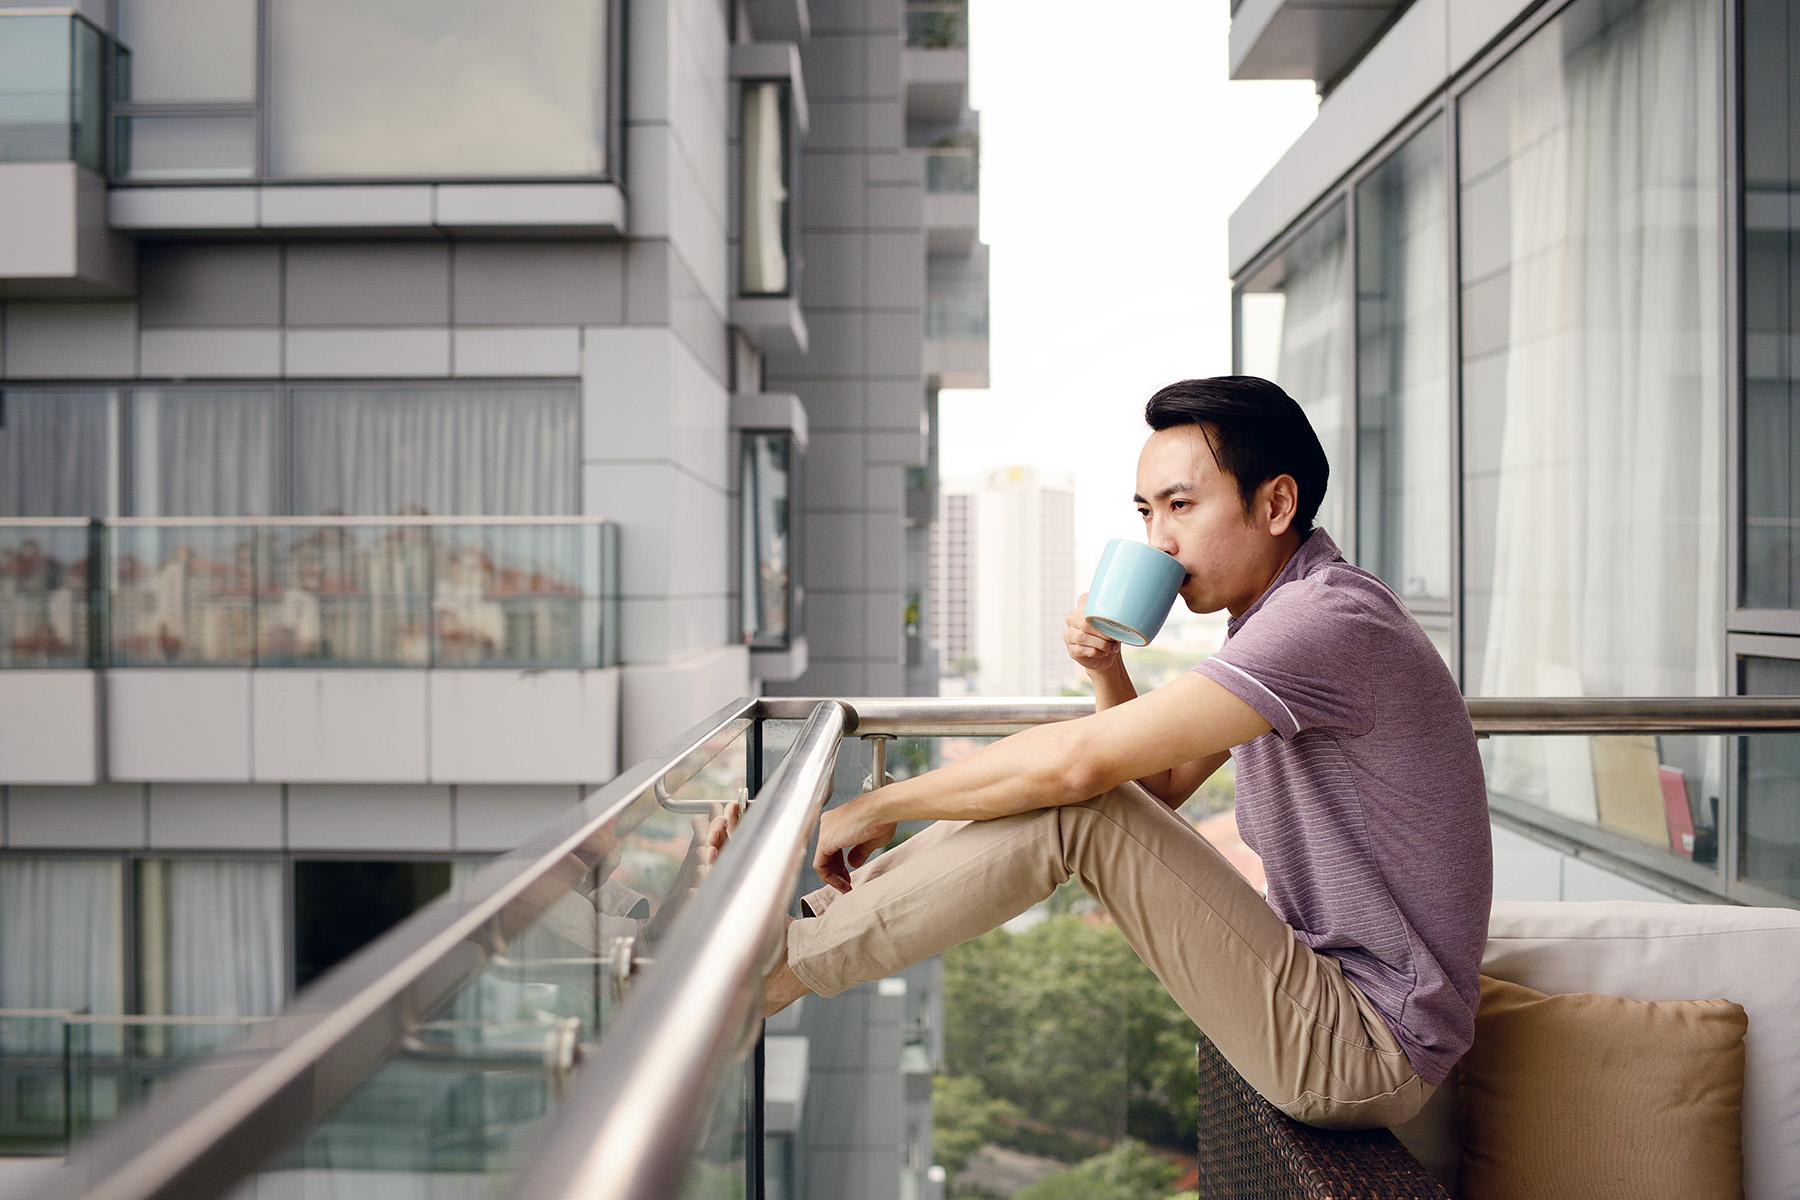 Man sitting on his balcony, drinking coffee. He has his feet on the side pannel.